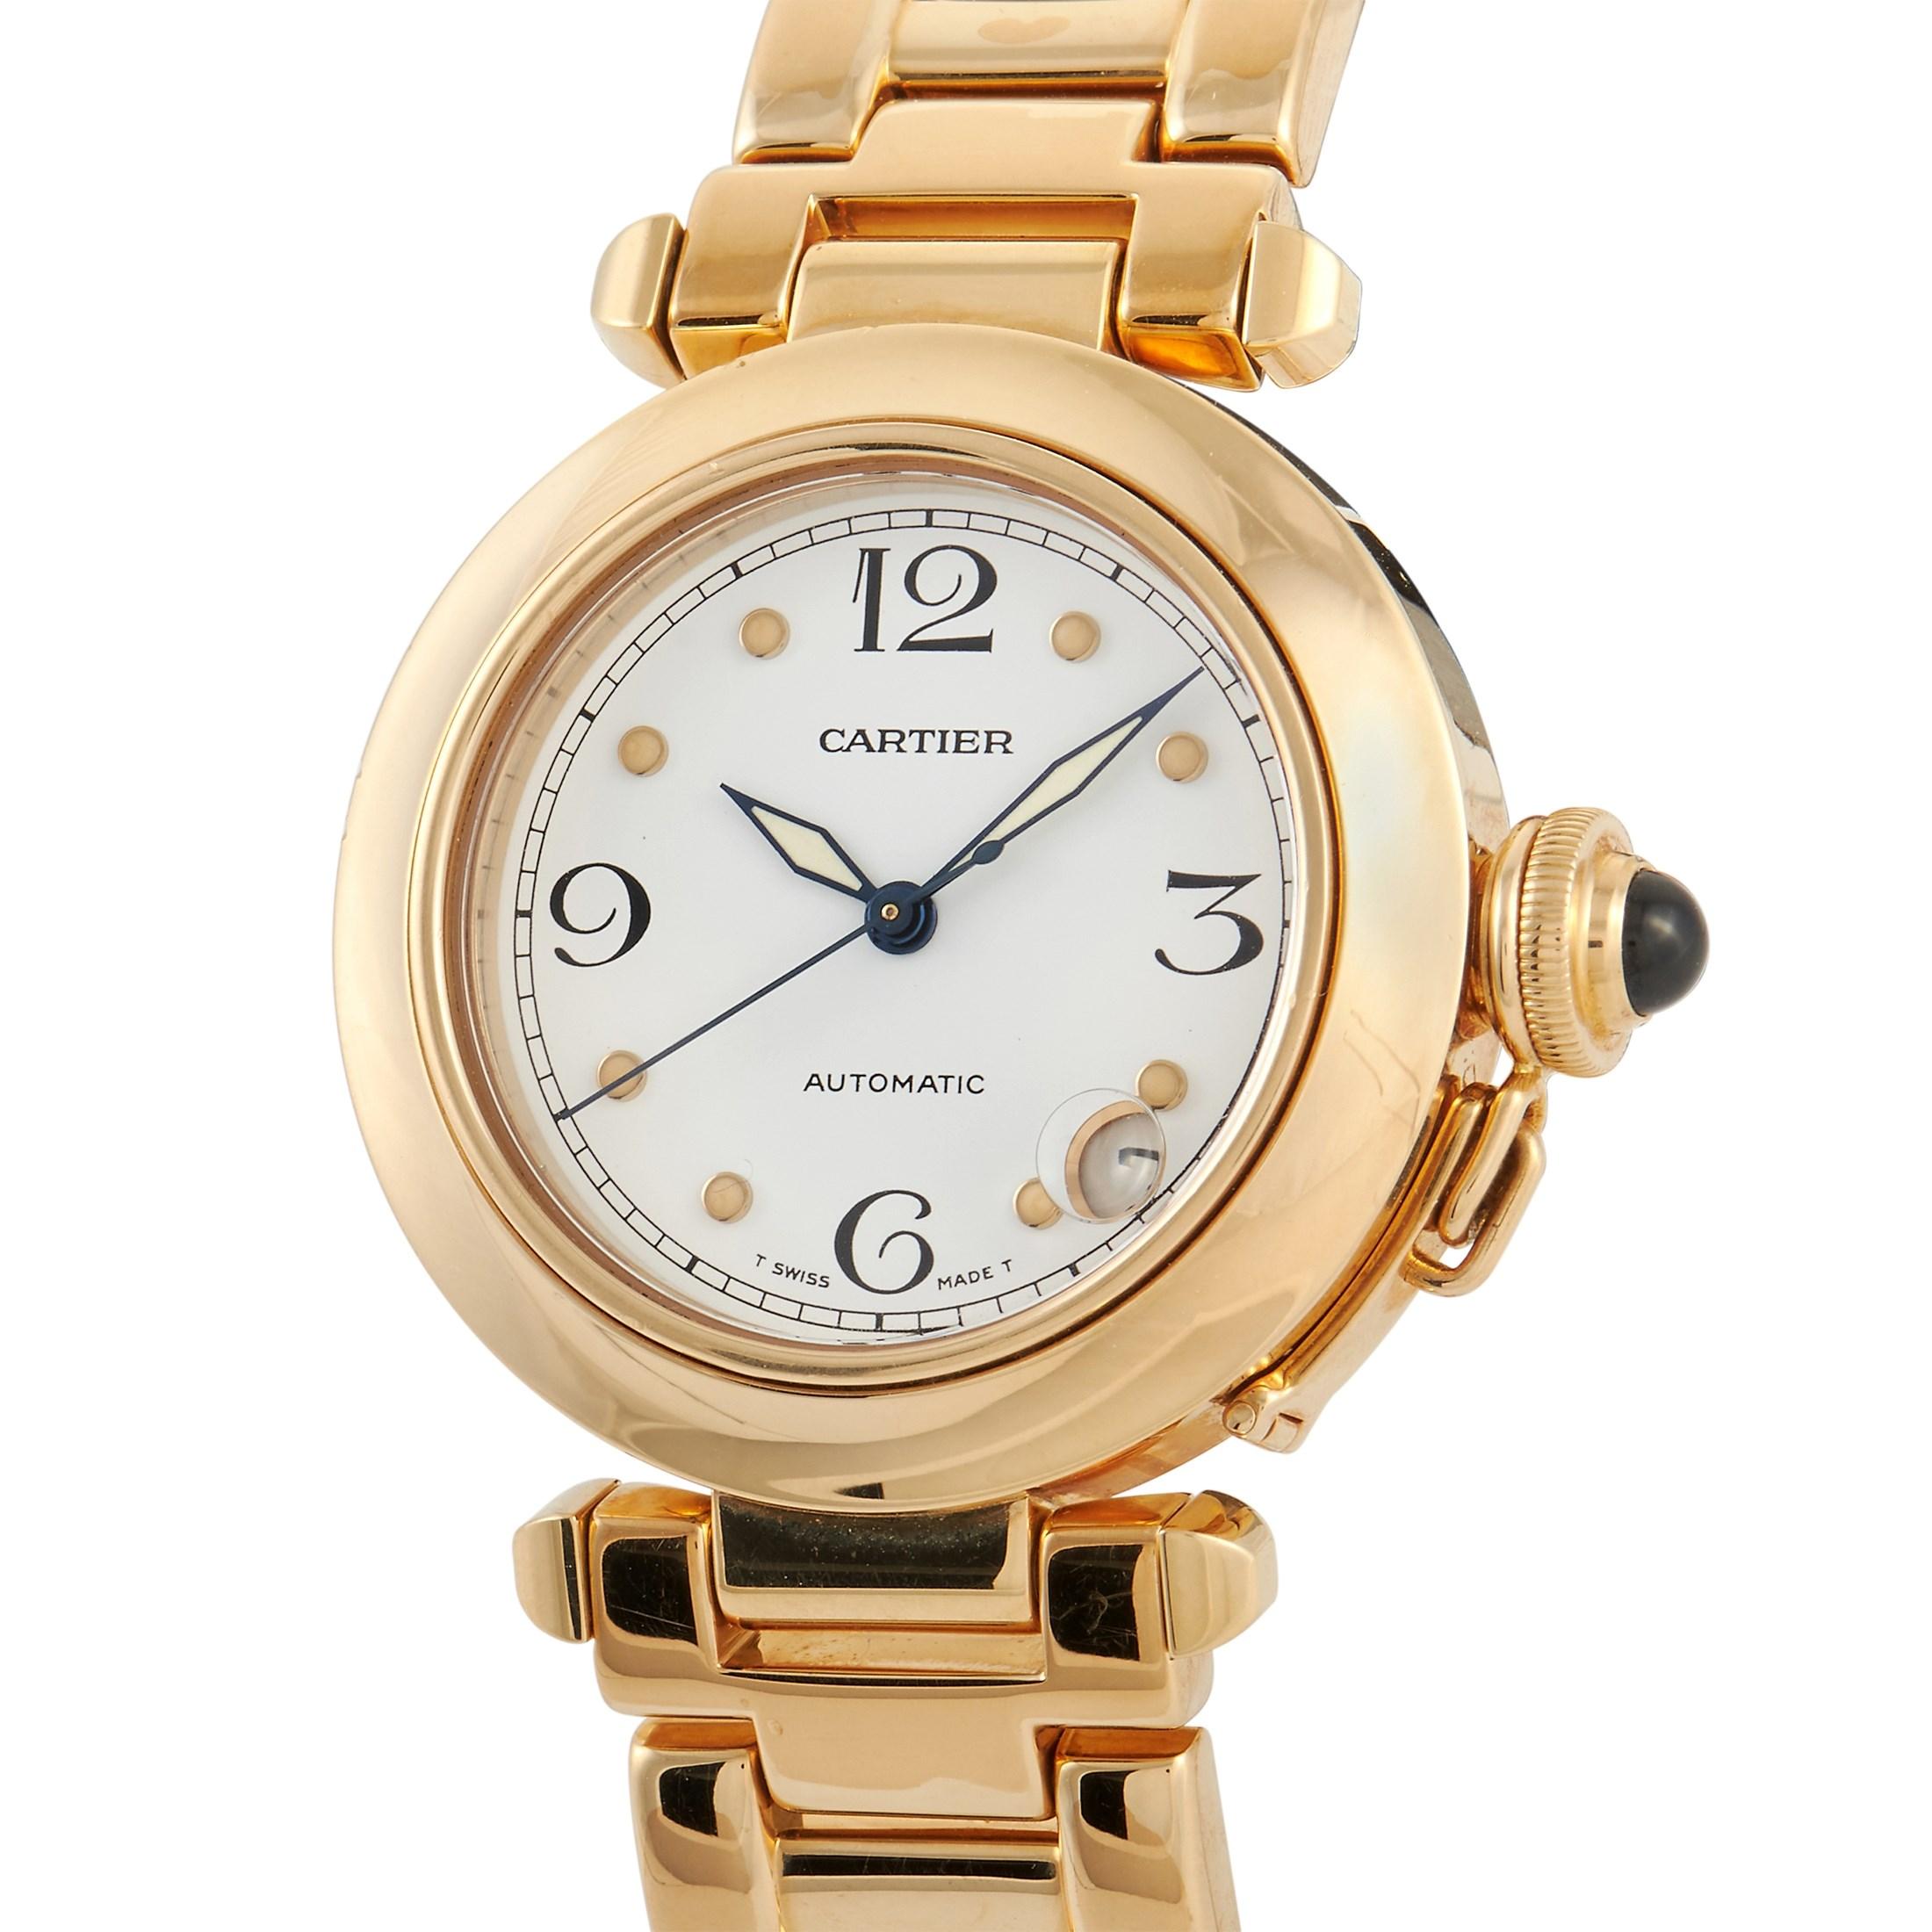 A style icon in the 30s and 40s, the Pasha de Cartier remains to be well-admired for its ageless beauty.  This automatic watch features a 36mm round case in 18K yellow gold. It has a white dial with dot hour markers and Arabic numerals for 12, 3,